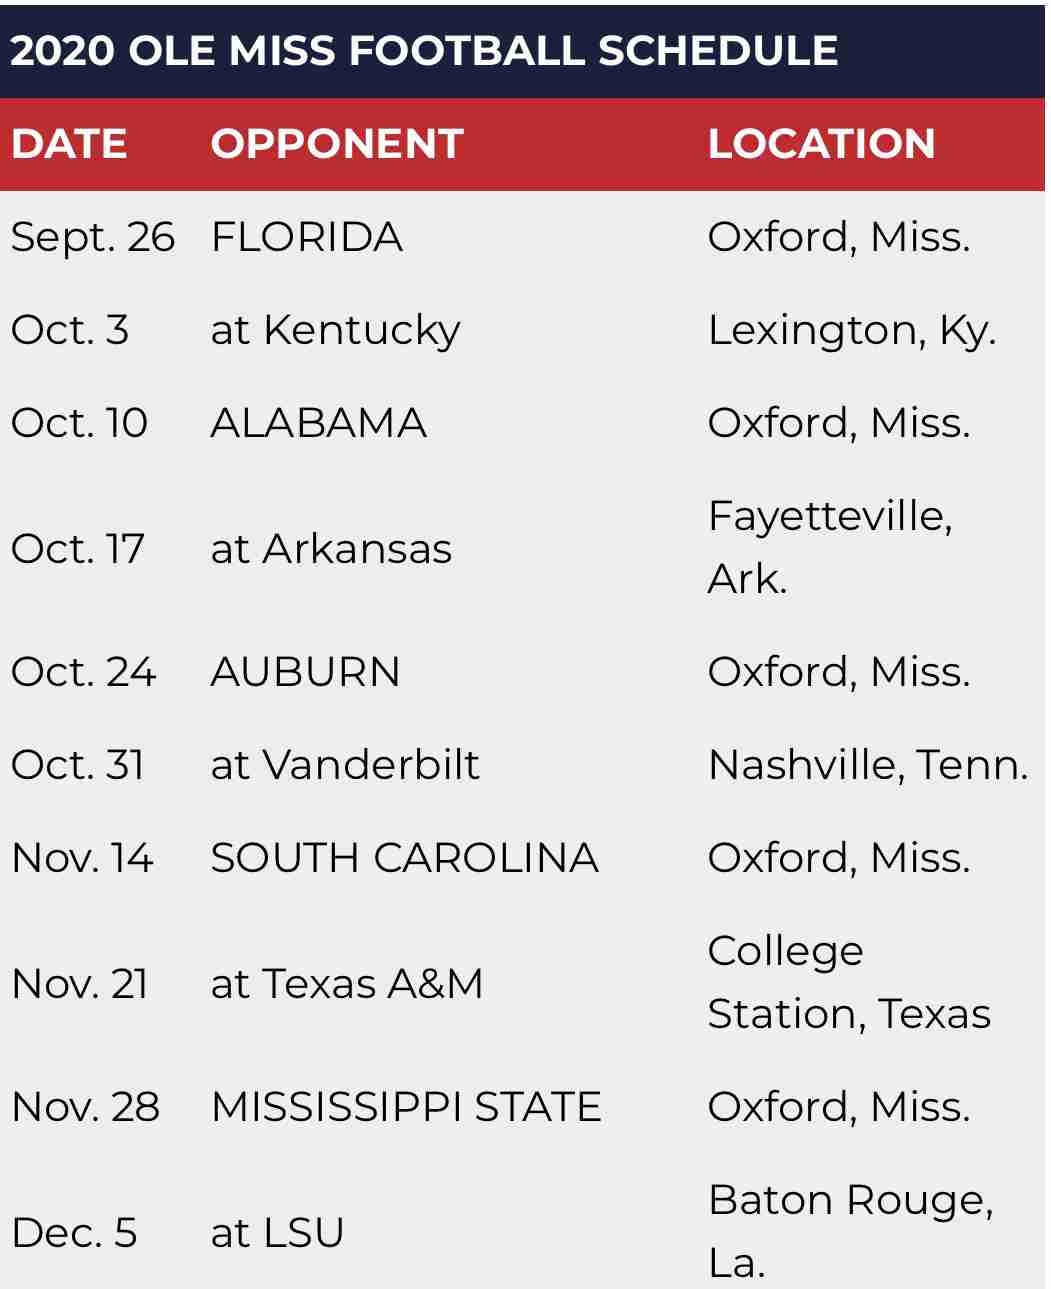 Revised 2020 Ole Miss Football Schedule Announced The Rebel Walk